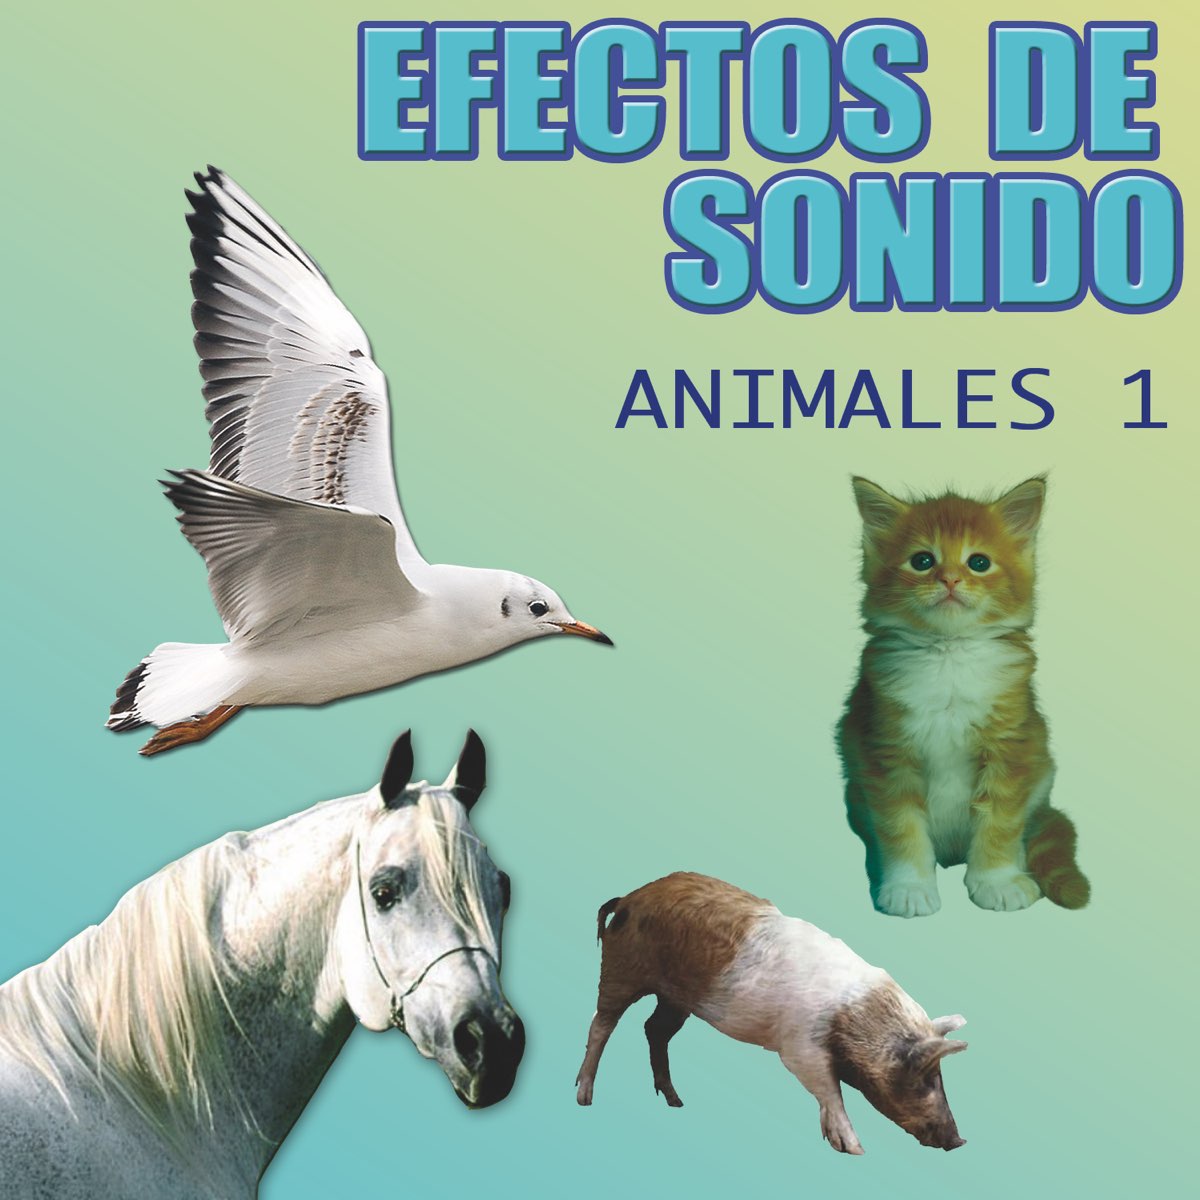 Efectos De Sonido Animales Vol.1 by Effects Sound D.J. on Apple Music